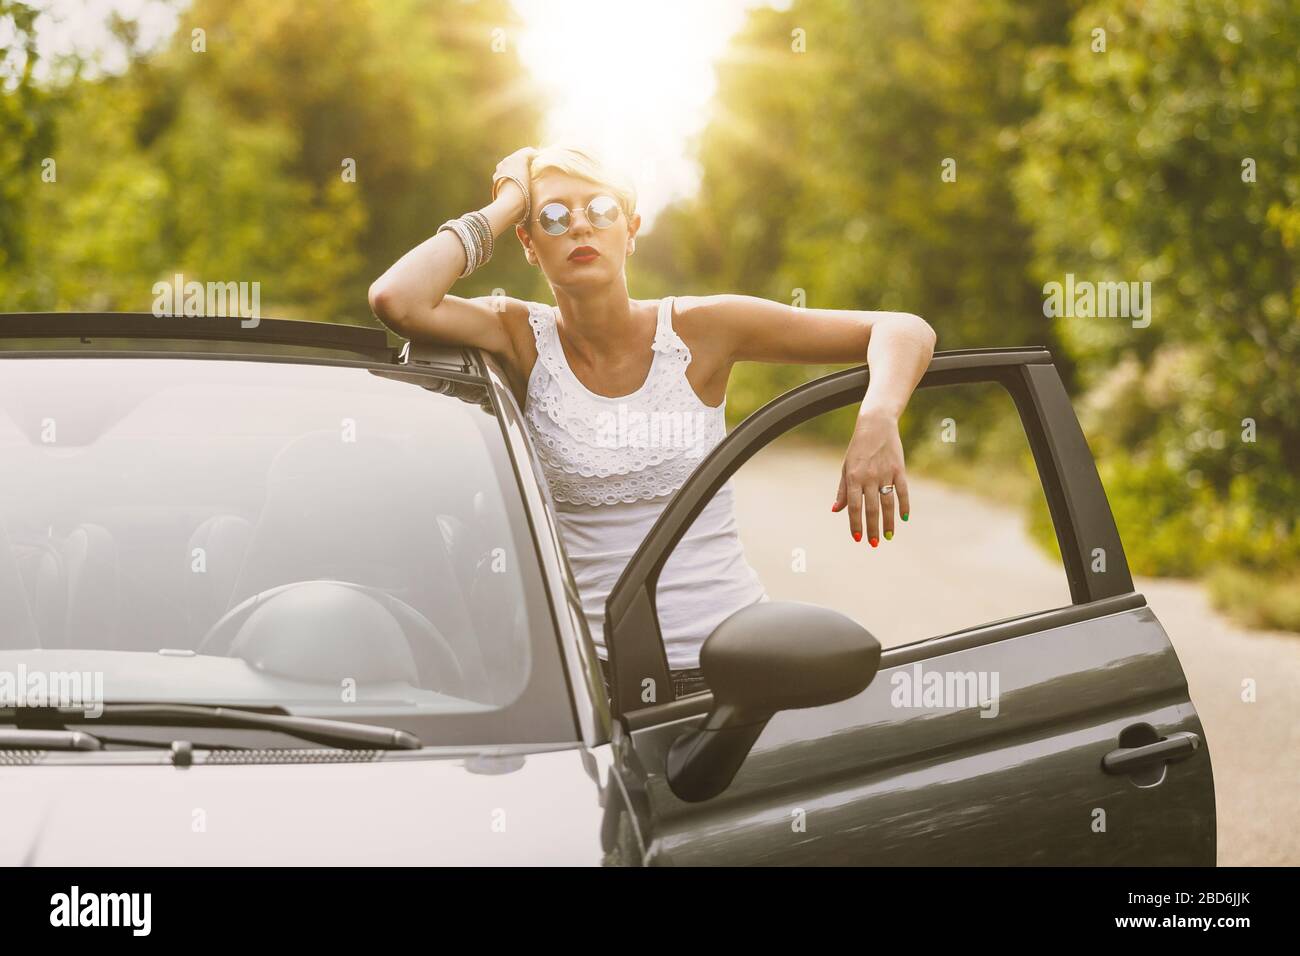 Young blonde attractive woman is ready to enter in her car. She is opening the door and staying behind it. Stock Photo